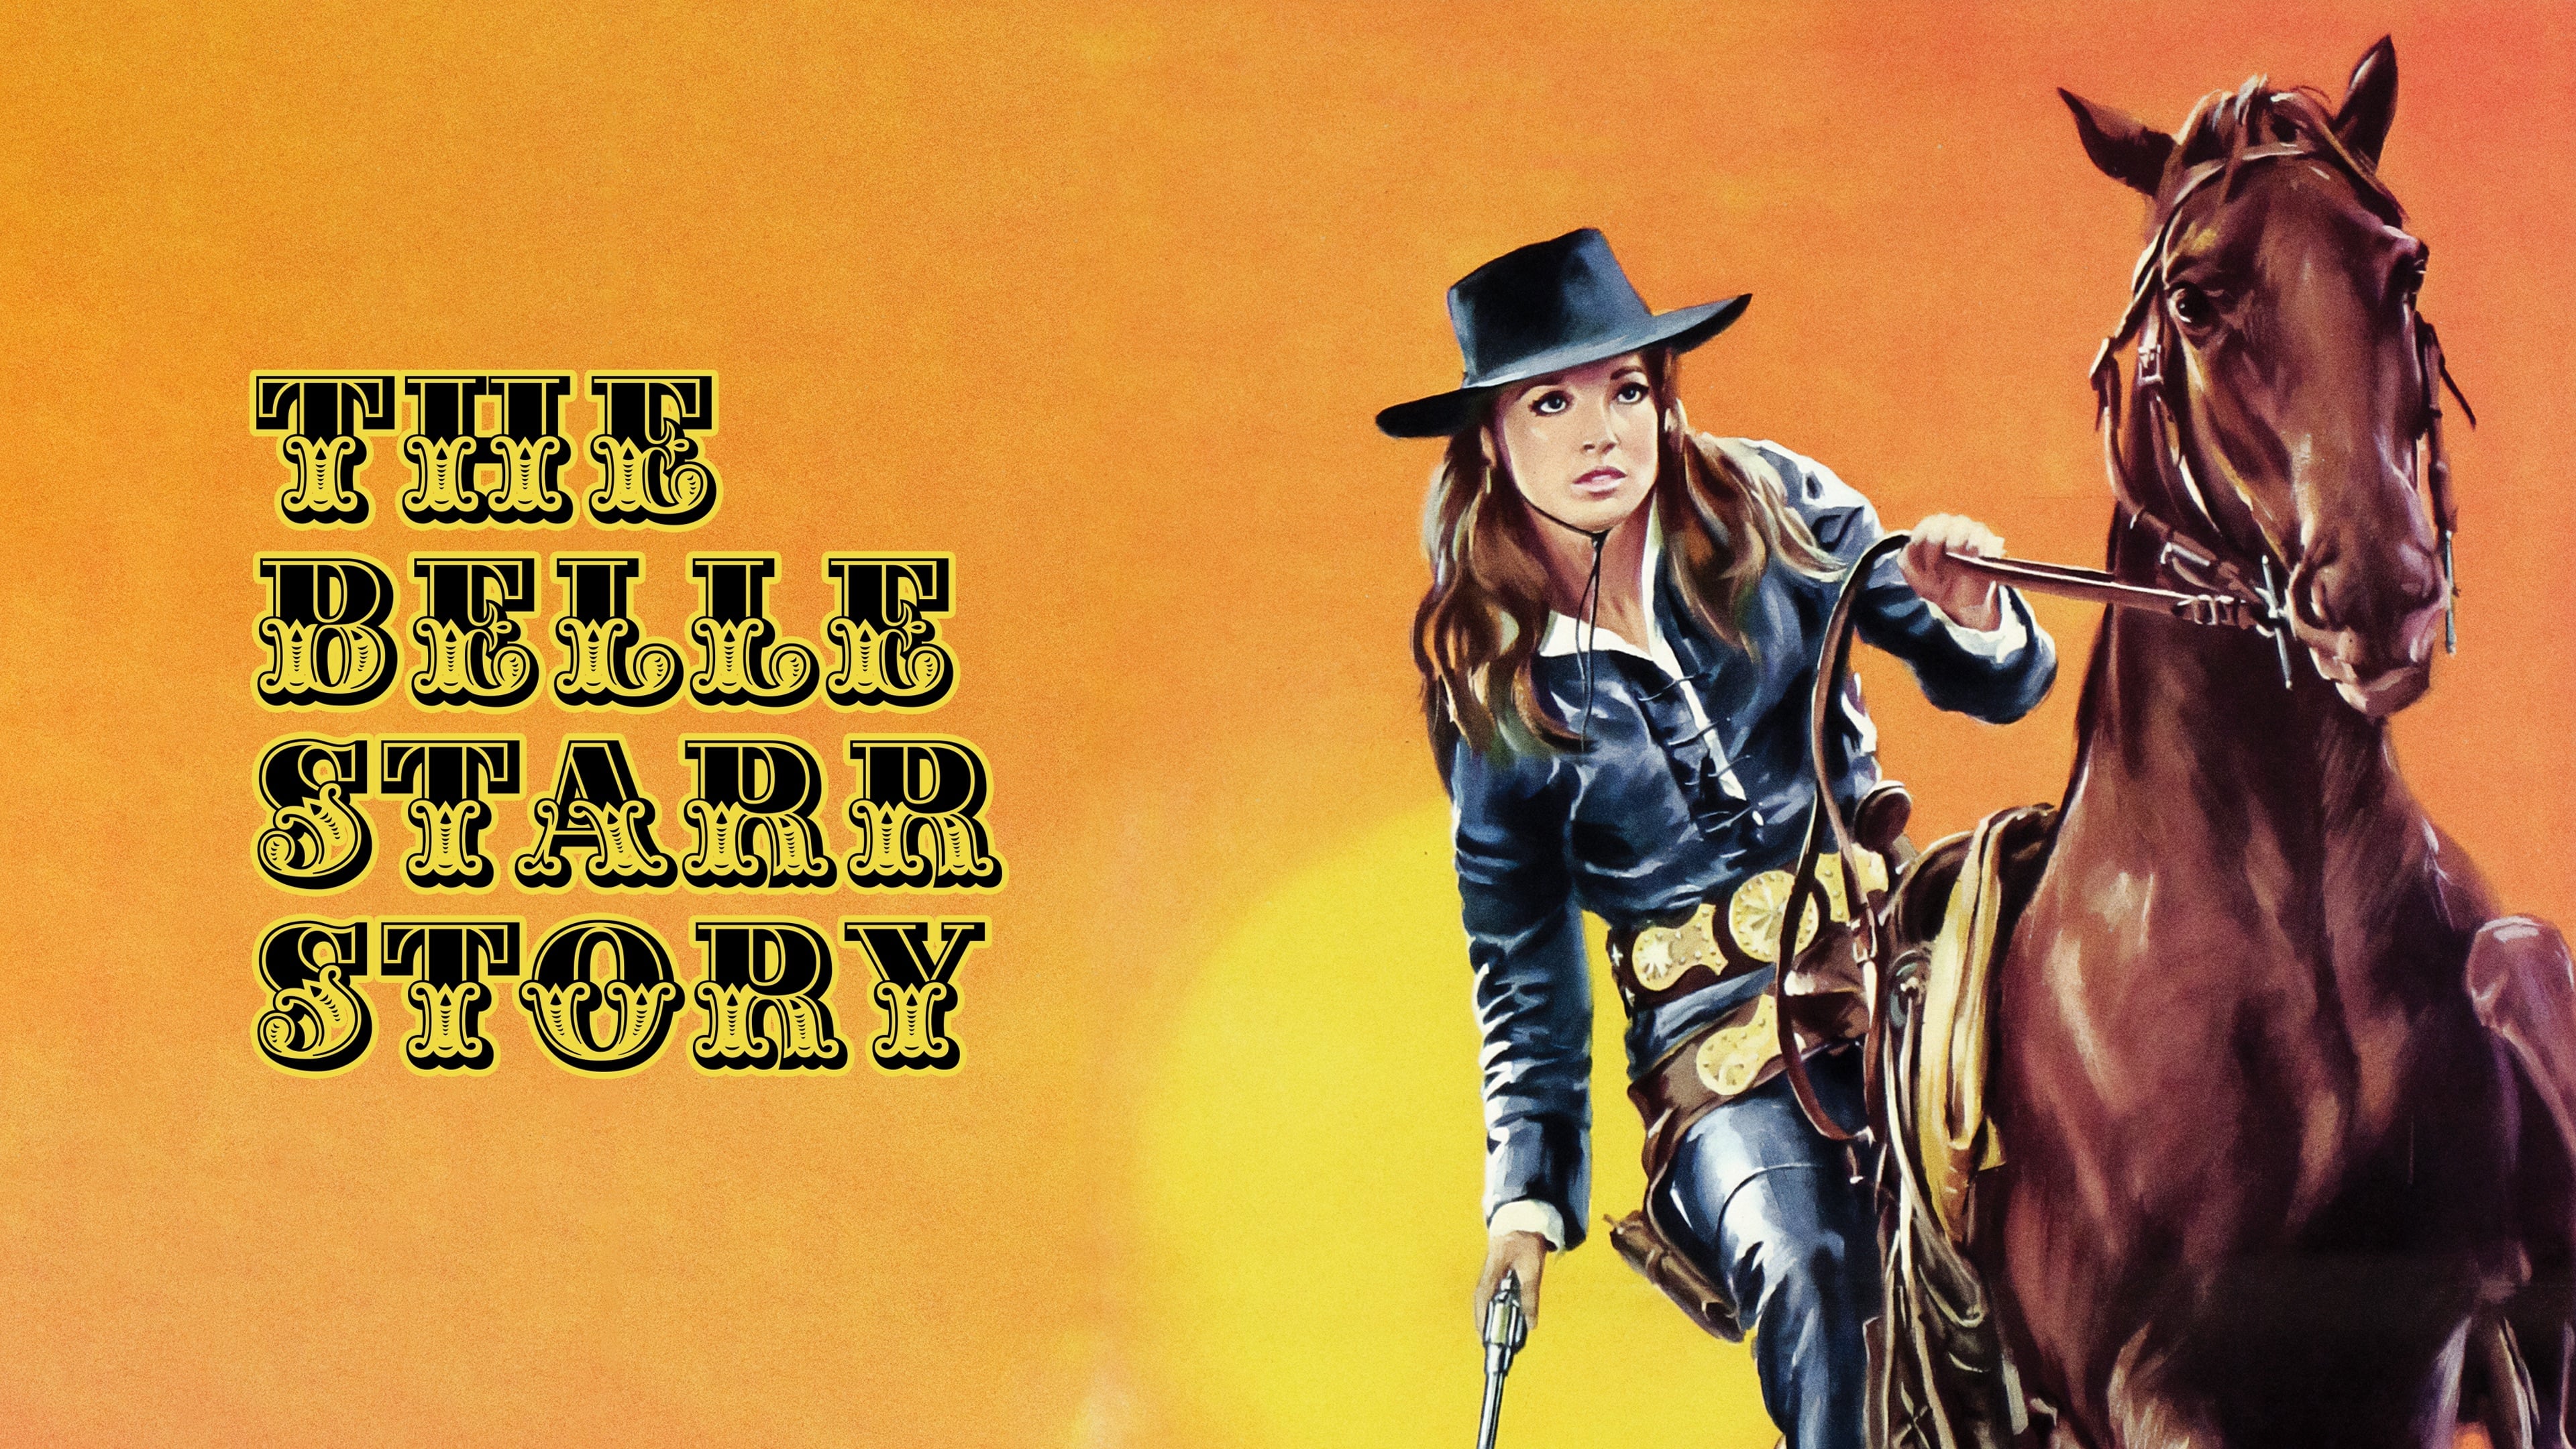 The Belle Starr Story (1968)